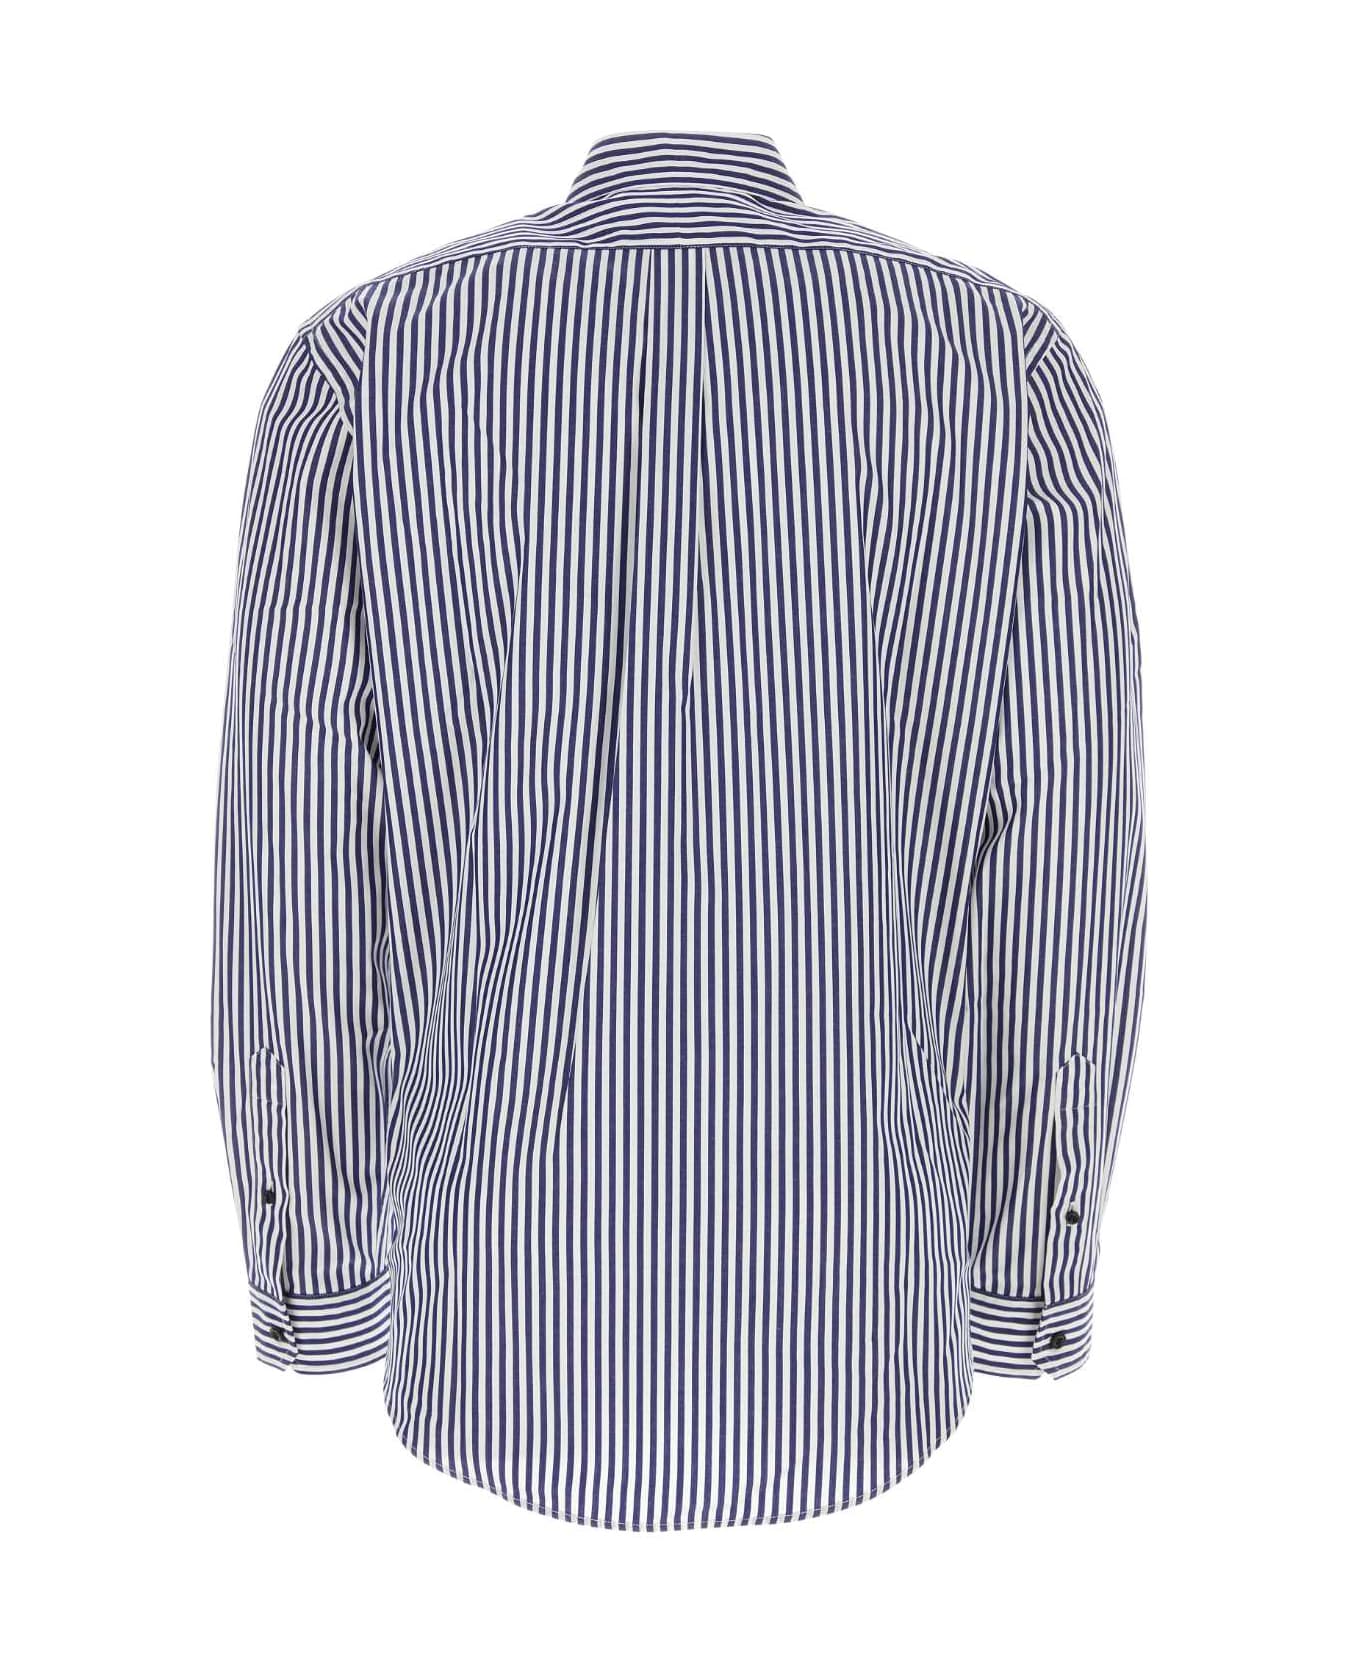 Y/Project Embroidered Poplin Oversize Shirt - NAVYWHITE